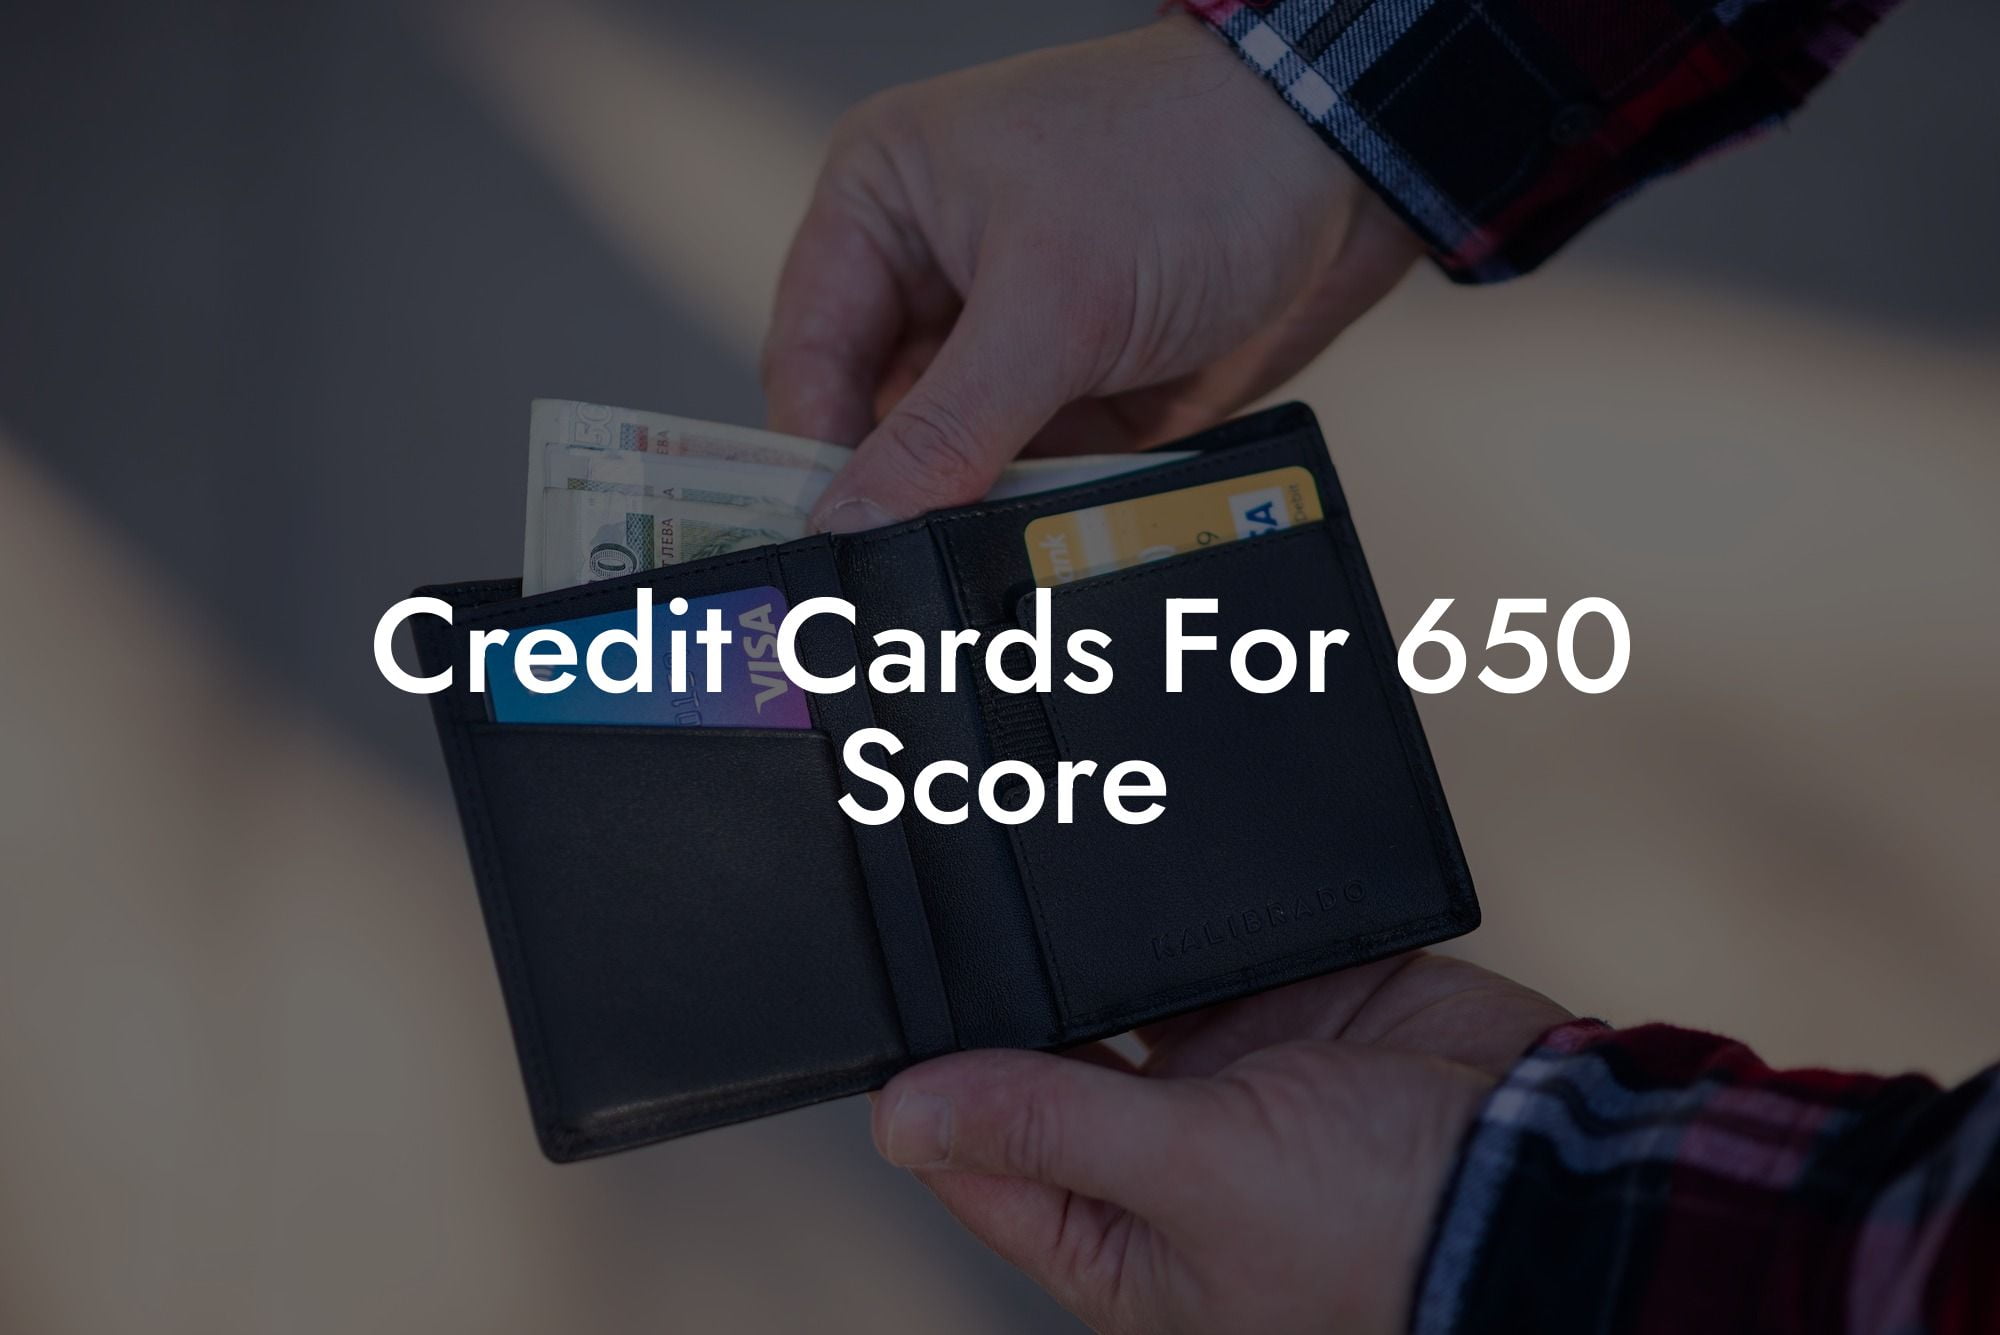 Credit Cards For 650 Score